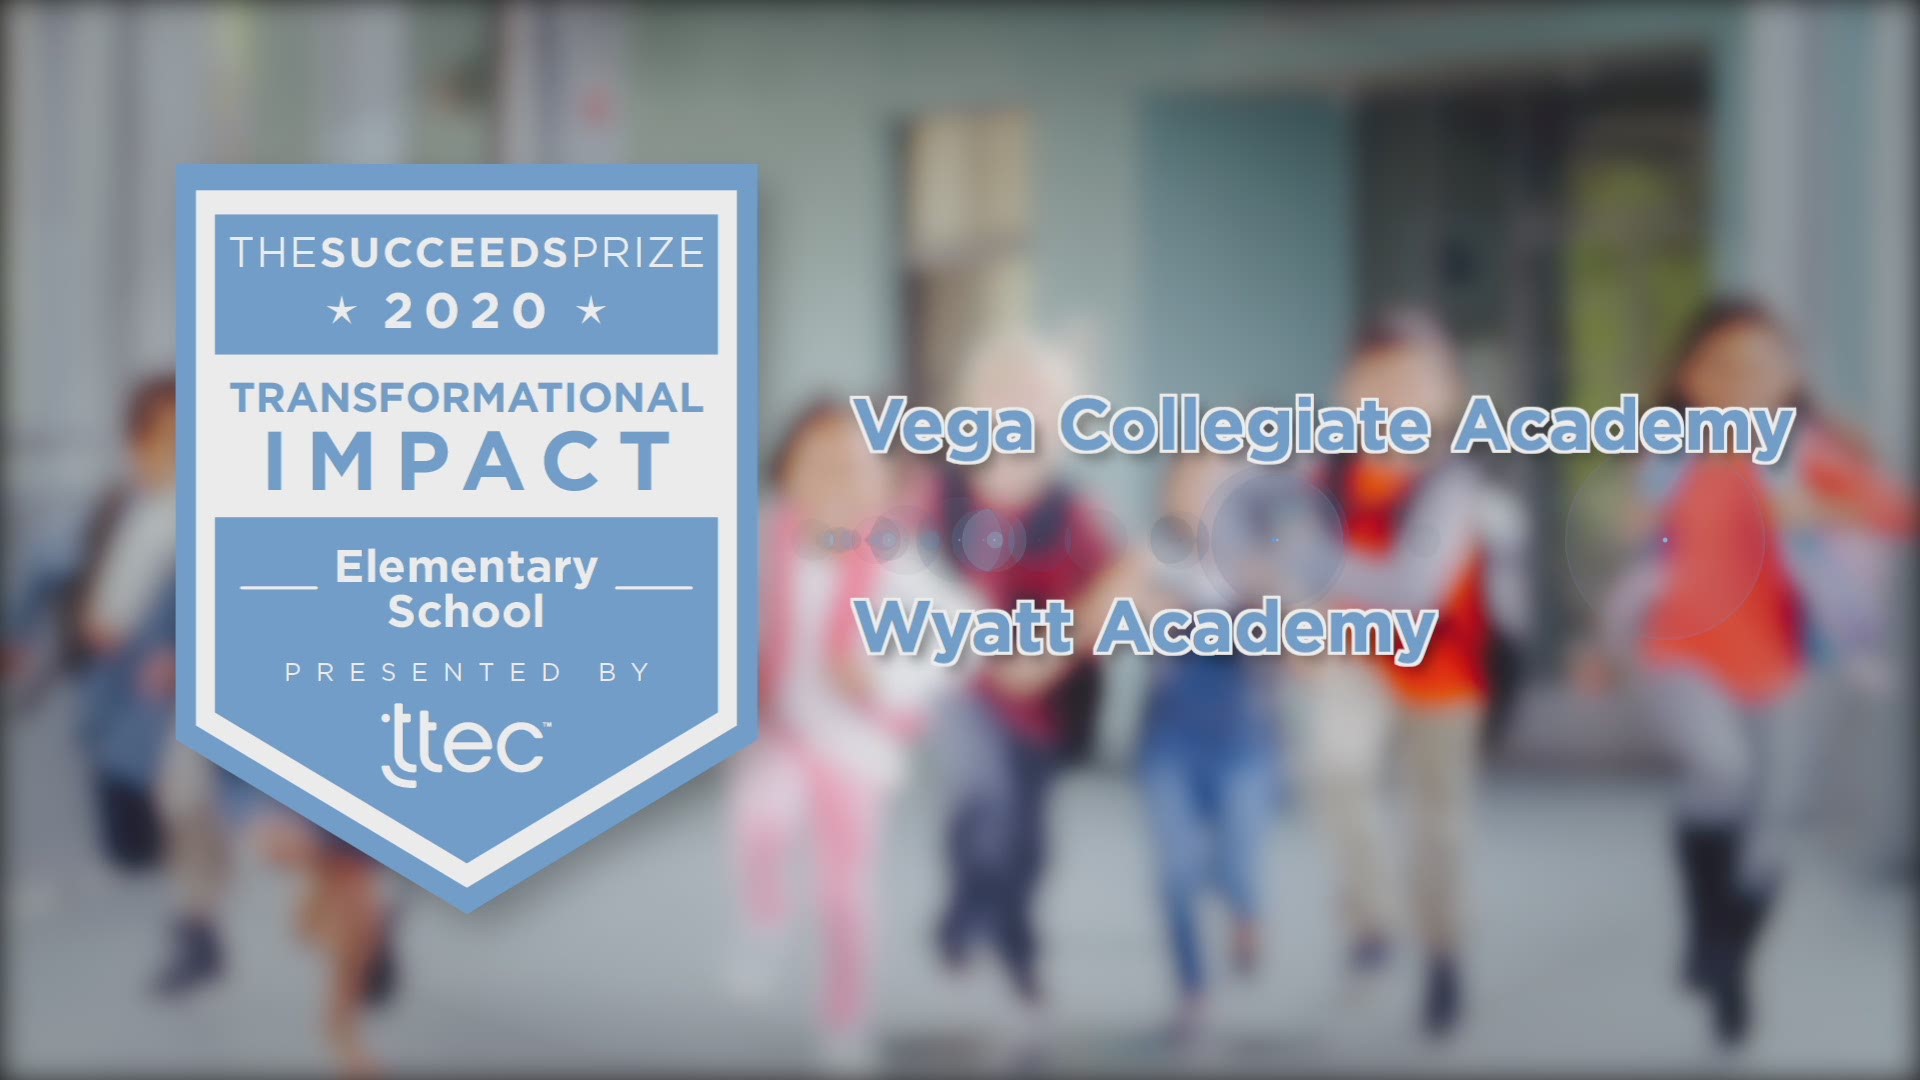 Wyatt Academy in Denver is the 2020 winner of the Succeeds Prize for Transformational Impact in an Elementary School.